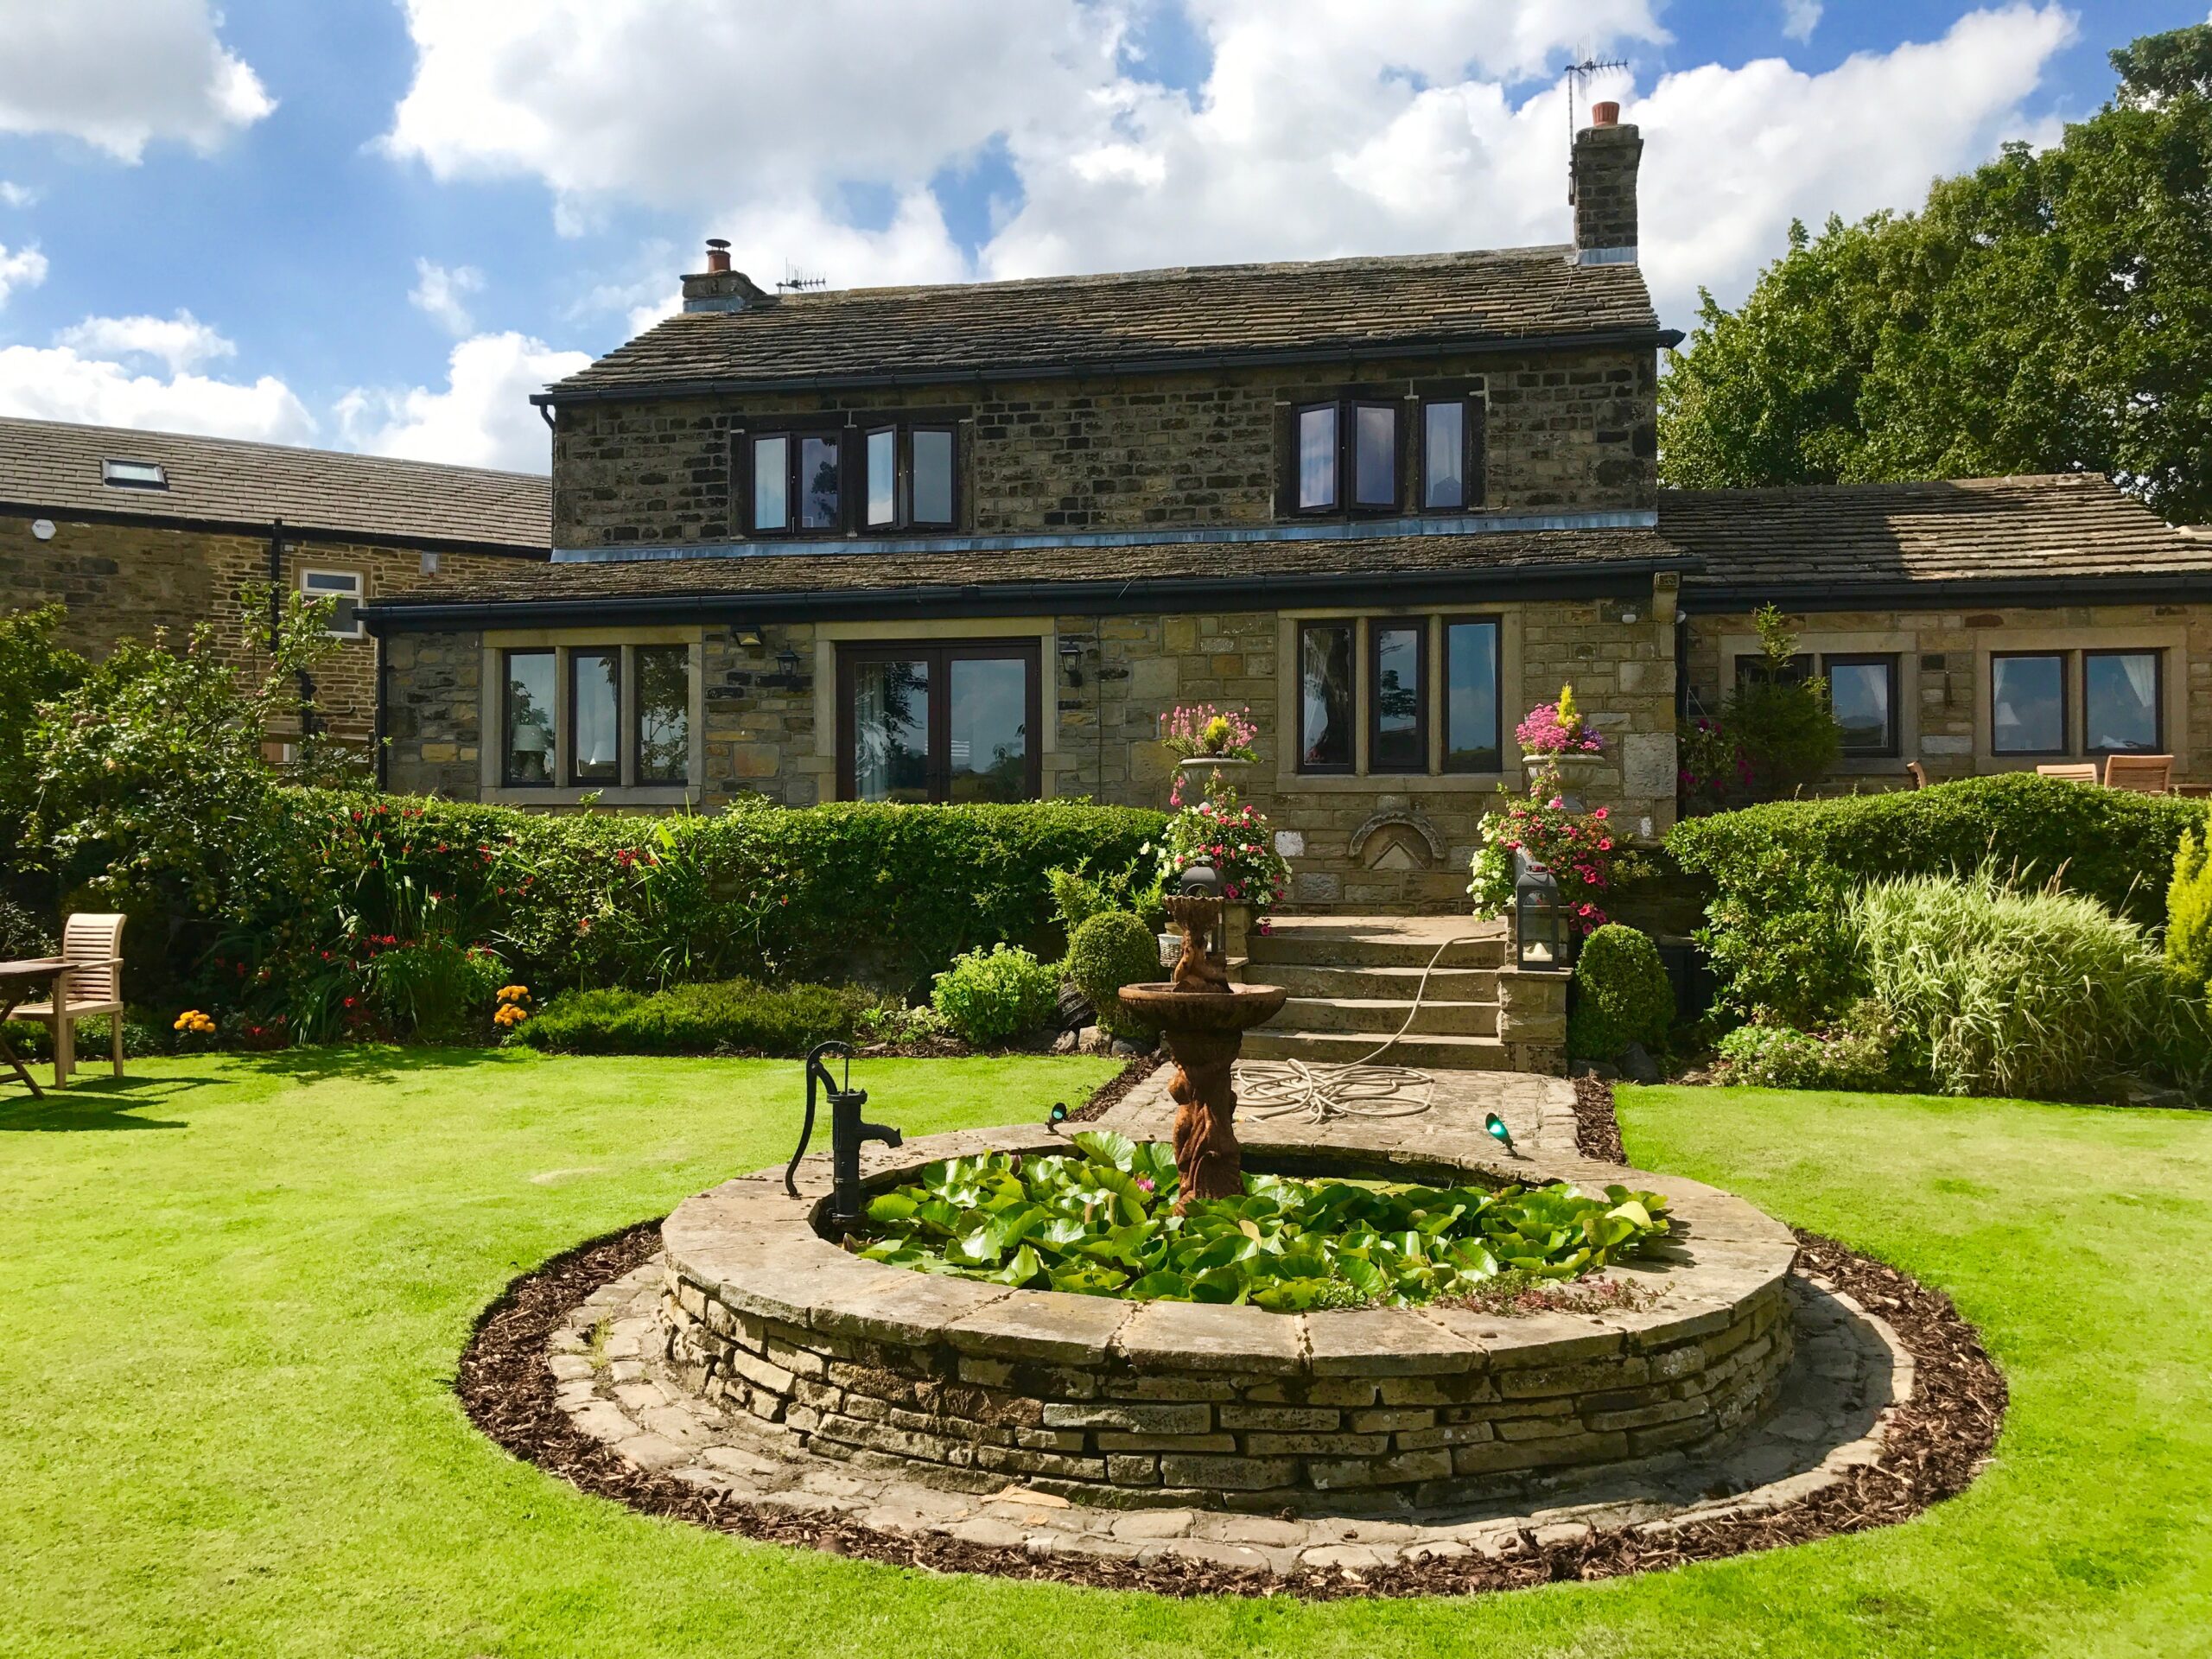 The Oakworth Farmhouse, Keighley, West Yorkshire, SouthCoast LocationFinder